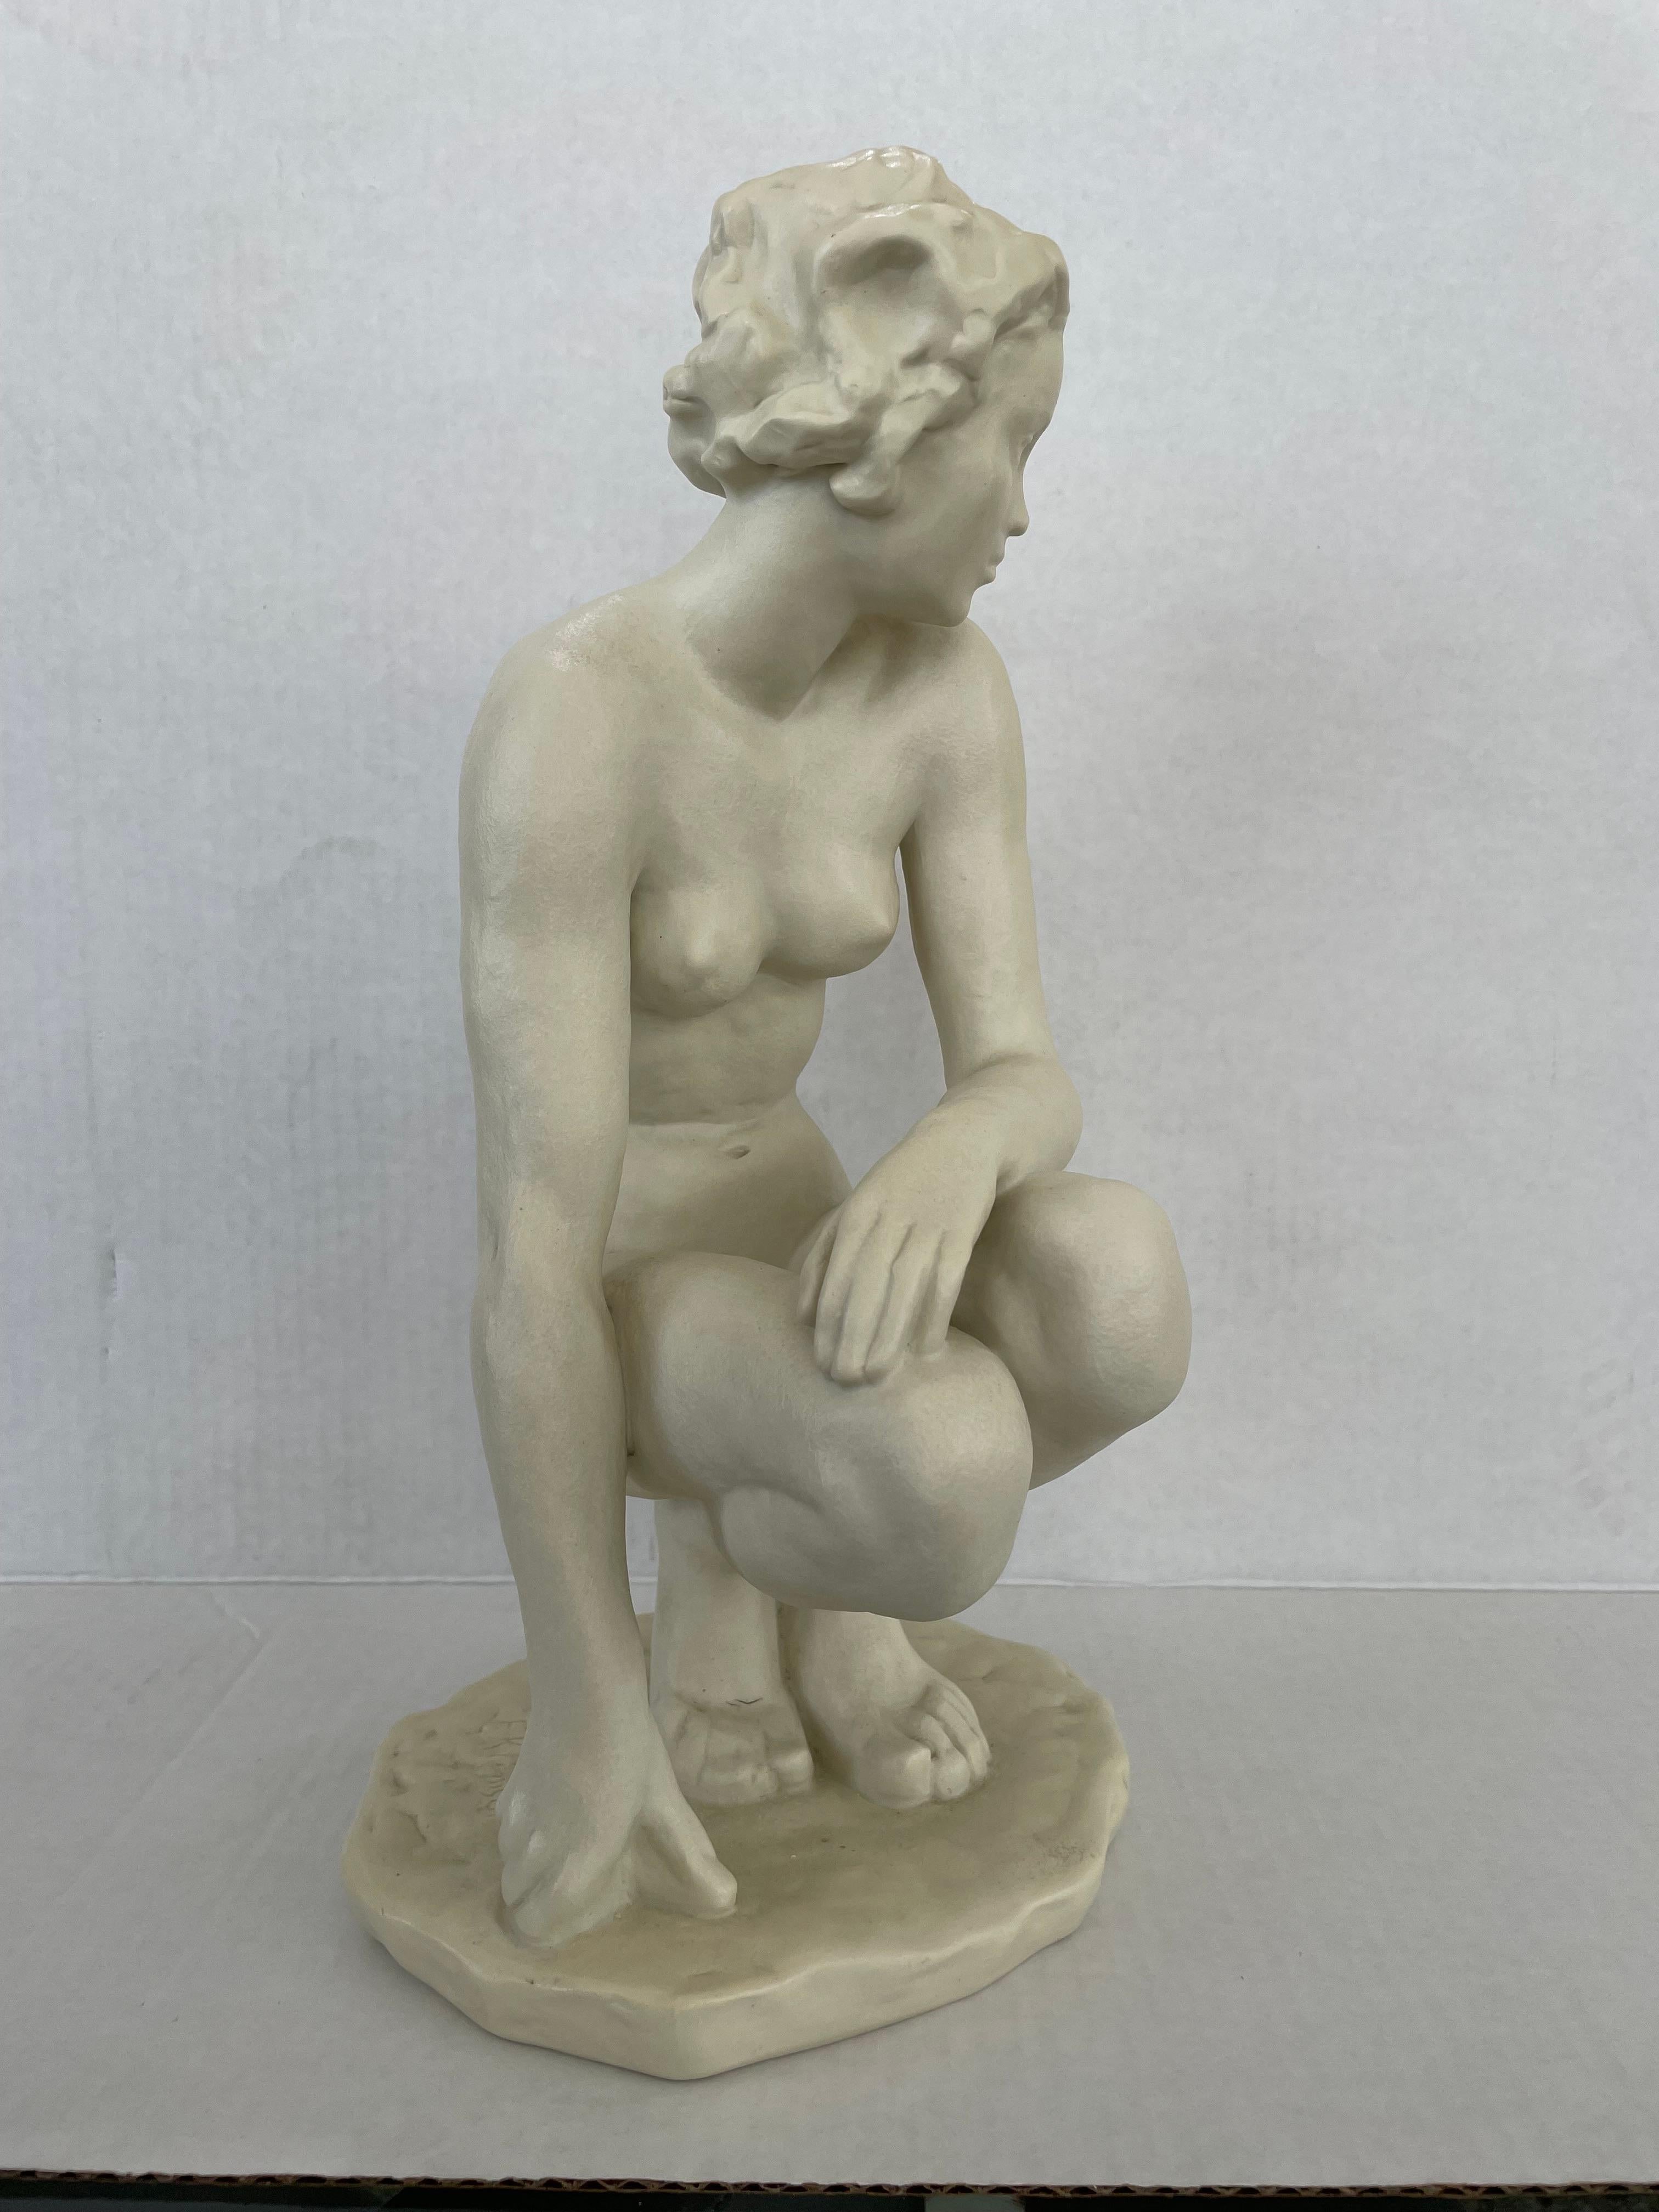 This stylish anc chic Art Deco figure of a nude female is titled 